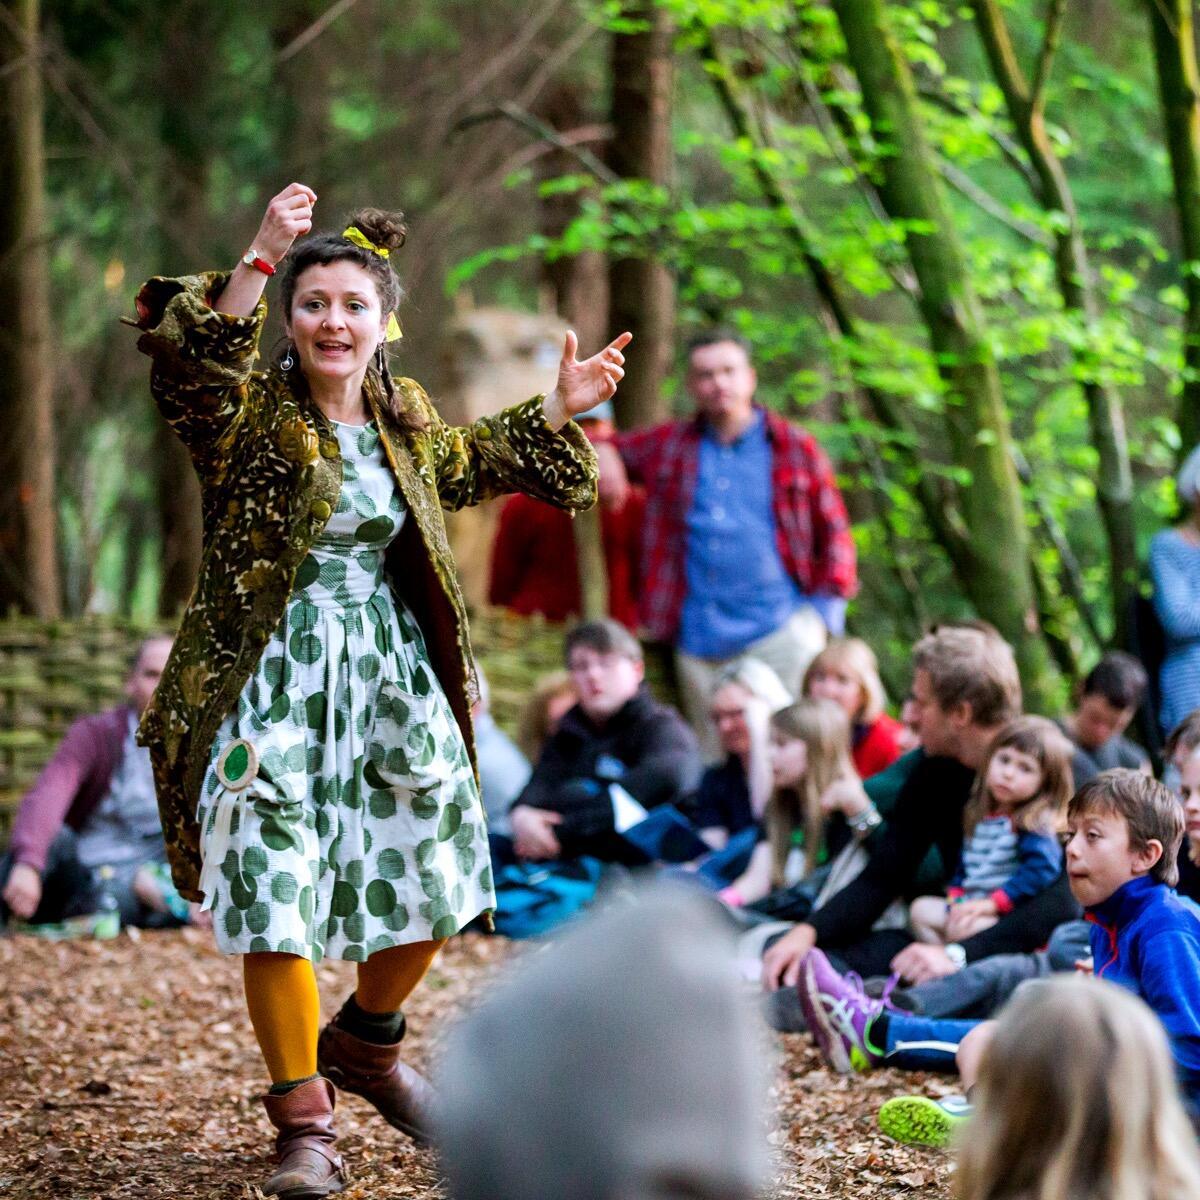 Lady passionately presents to a group in the Woods